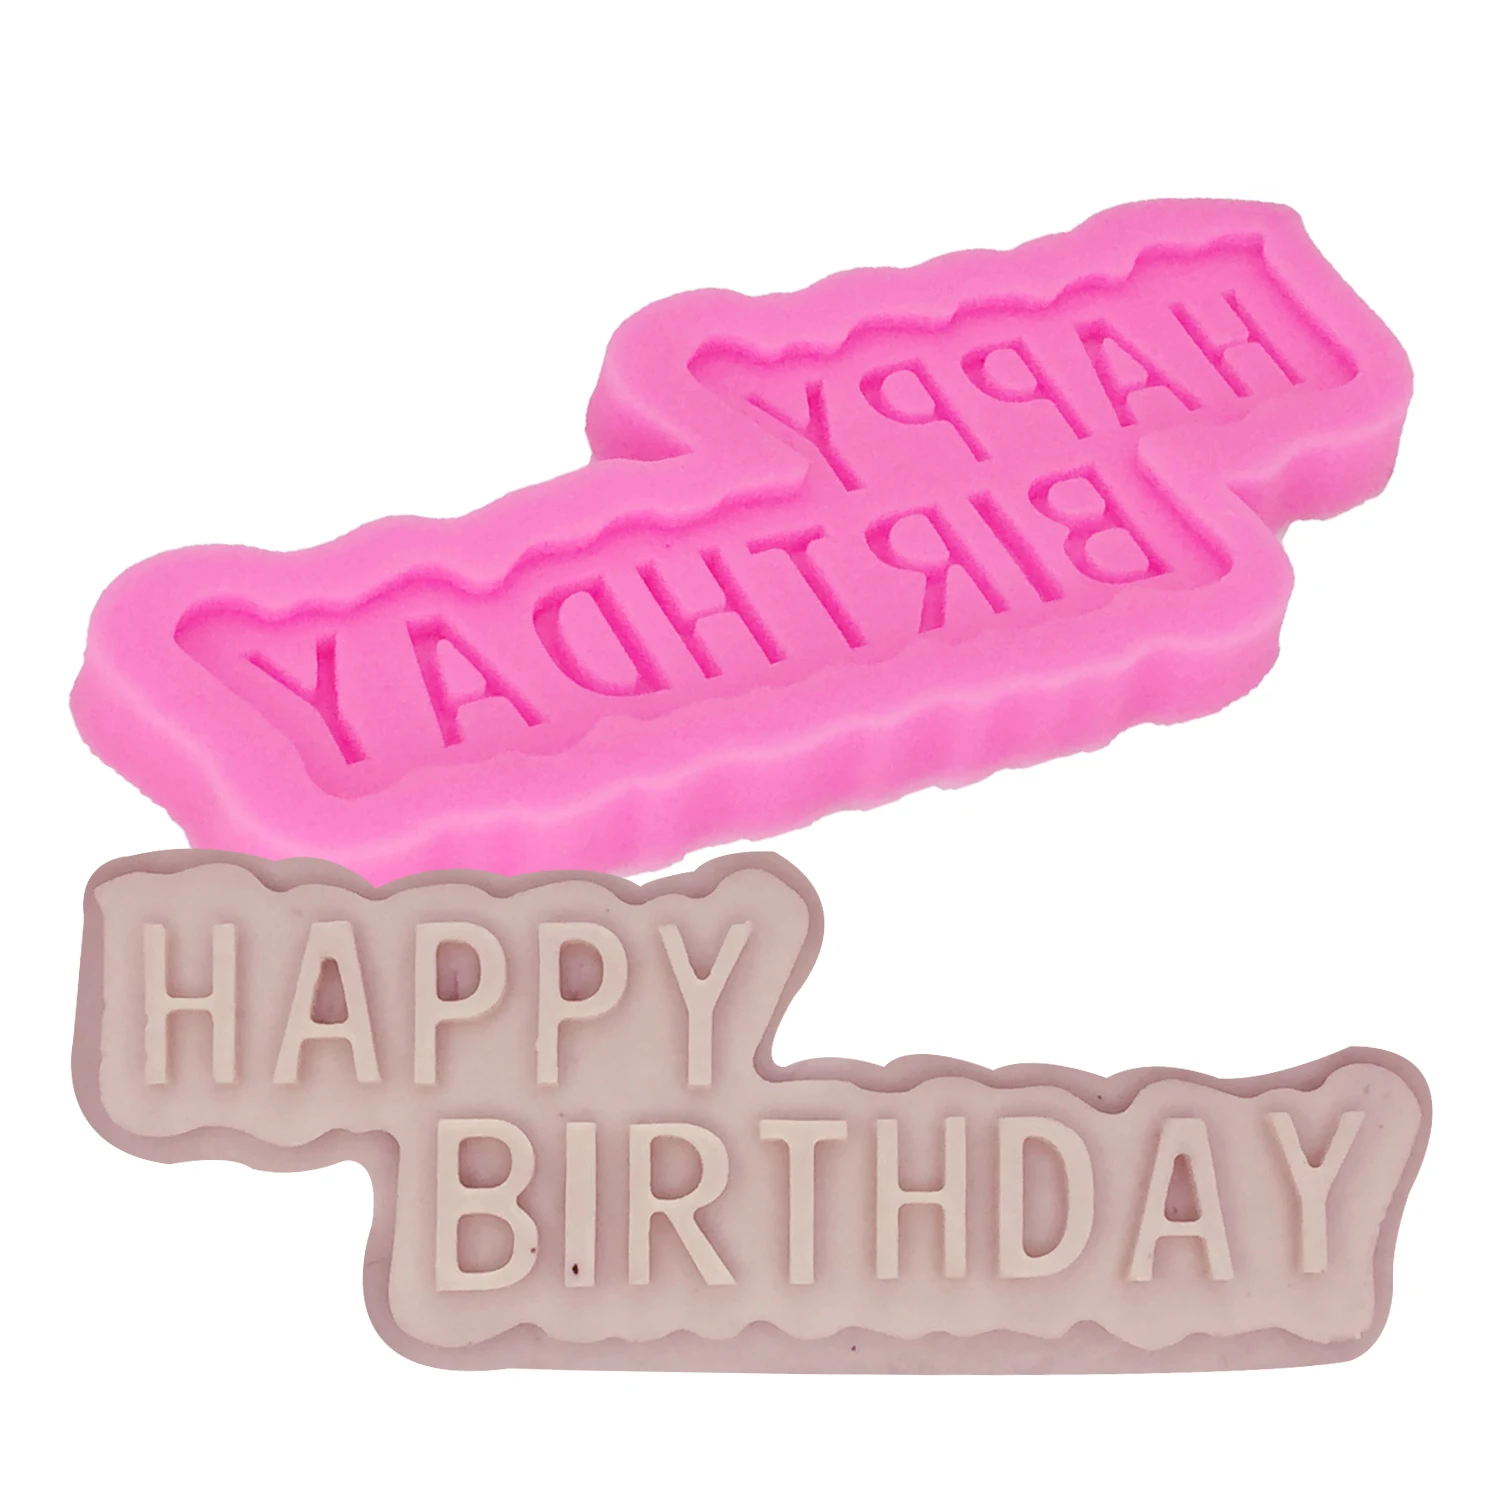 M0183 Happy Birthday Shape Silicone Letter Lace Mold Cake Tools ...